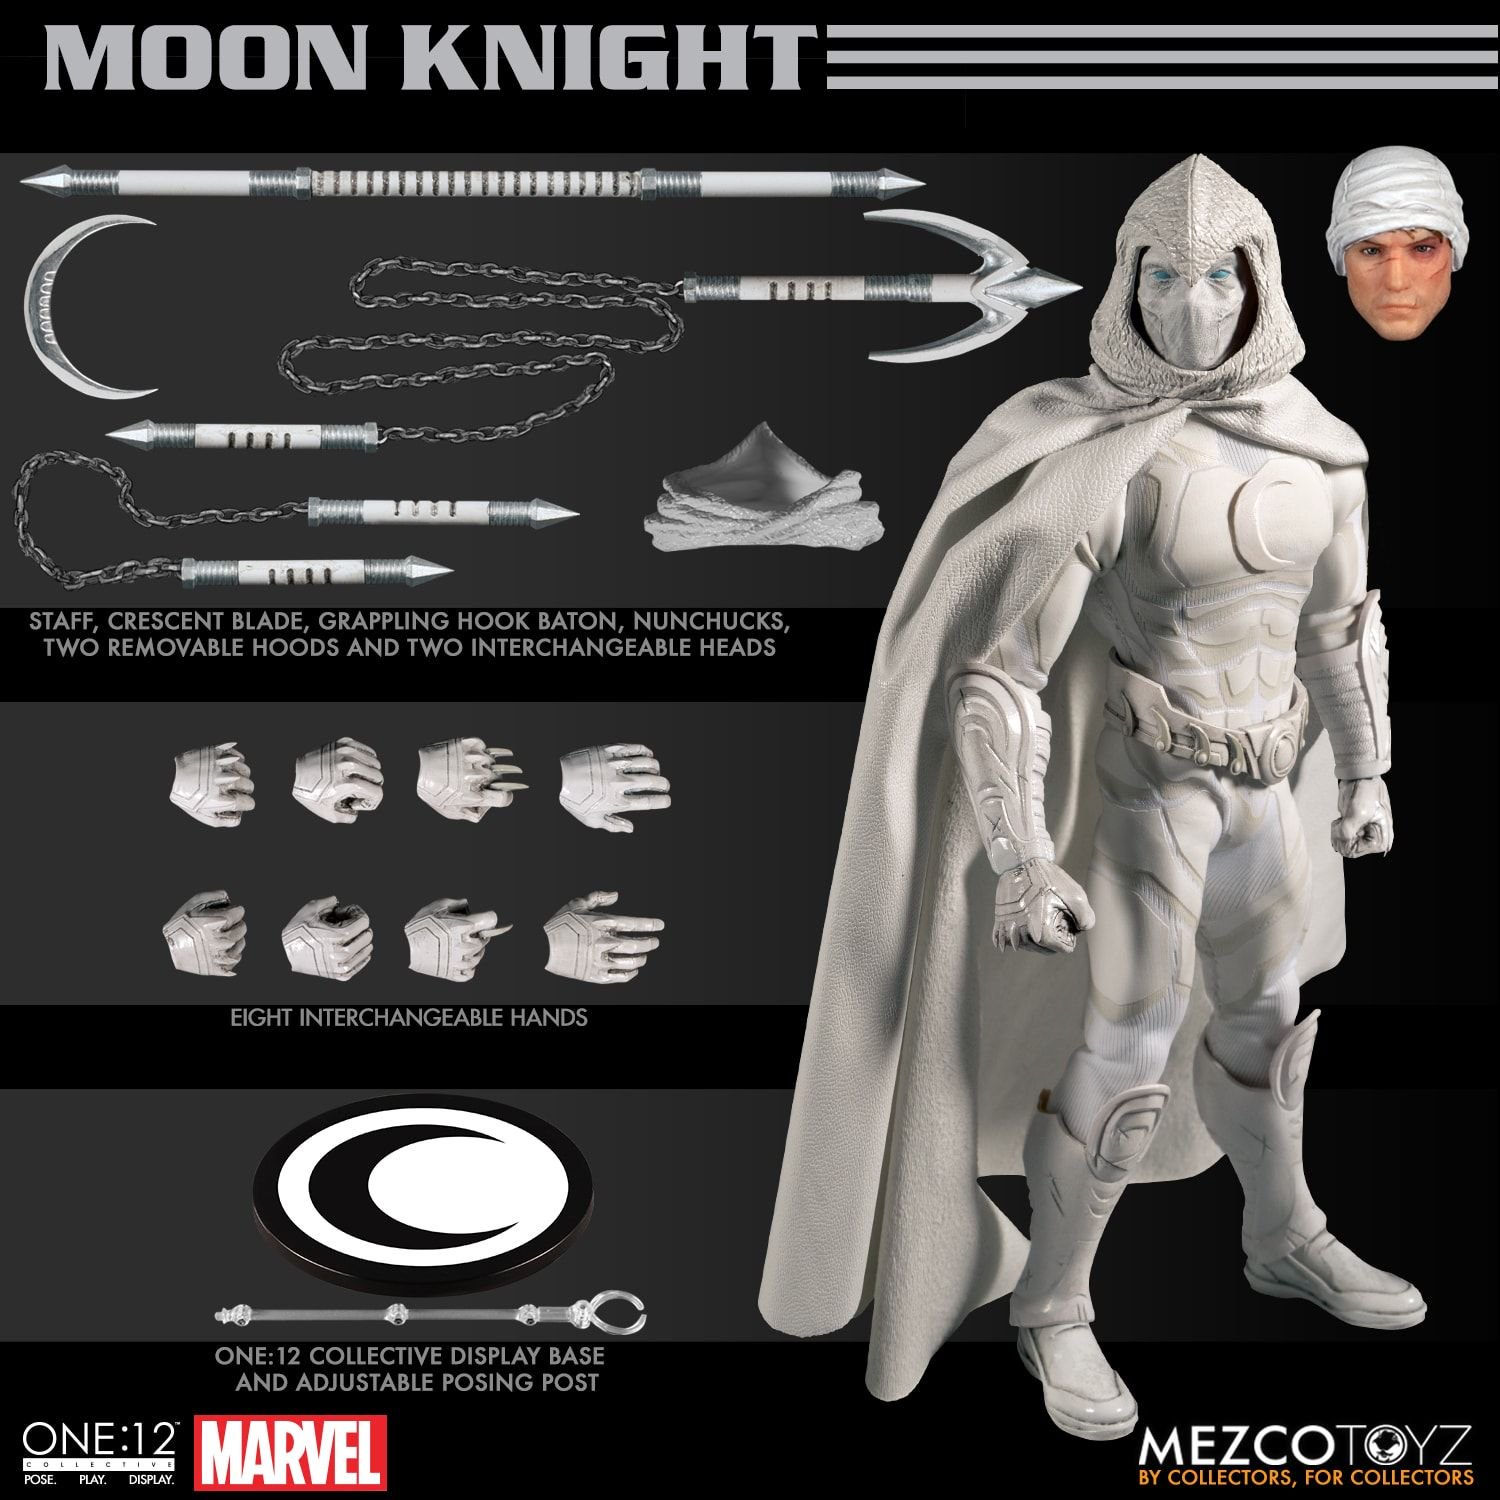 Mezco ONE:12 Collective Moon Knight Figure Up for Order